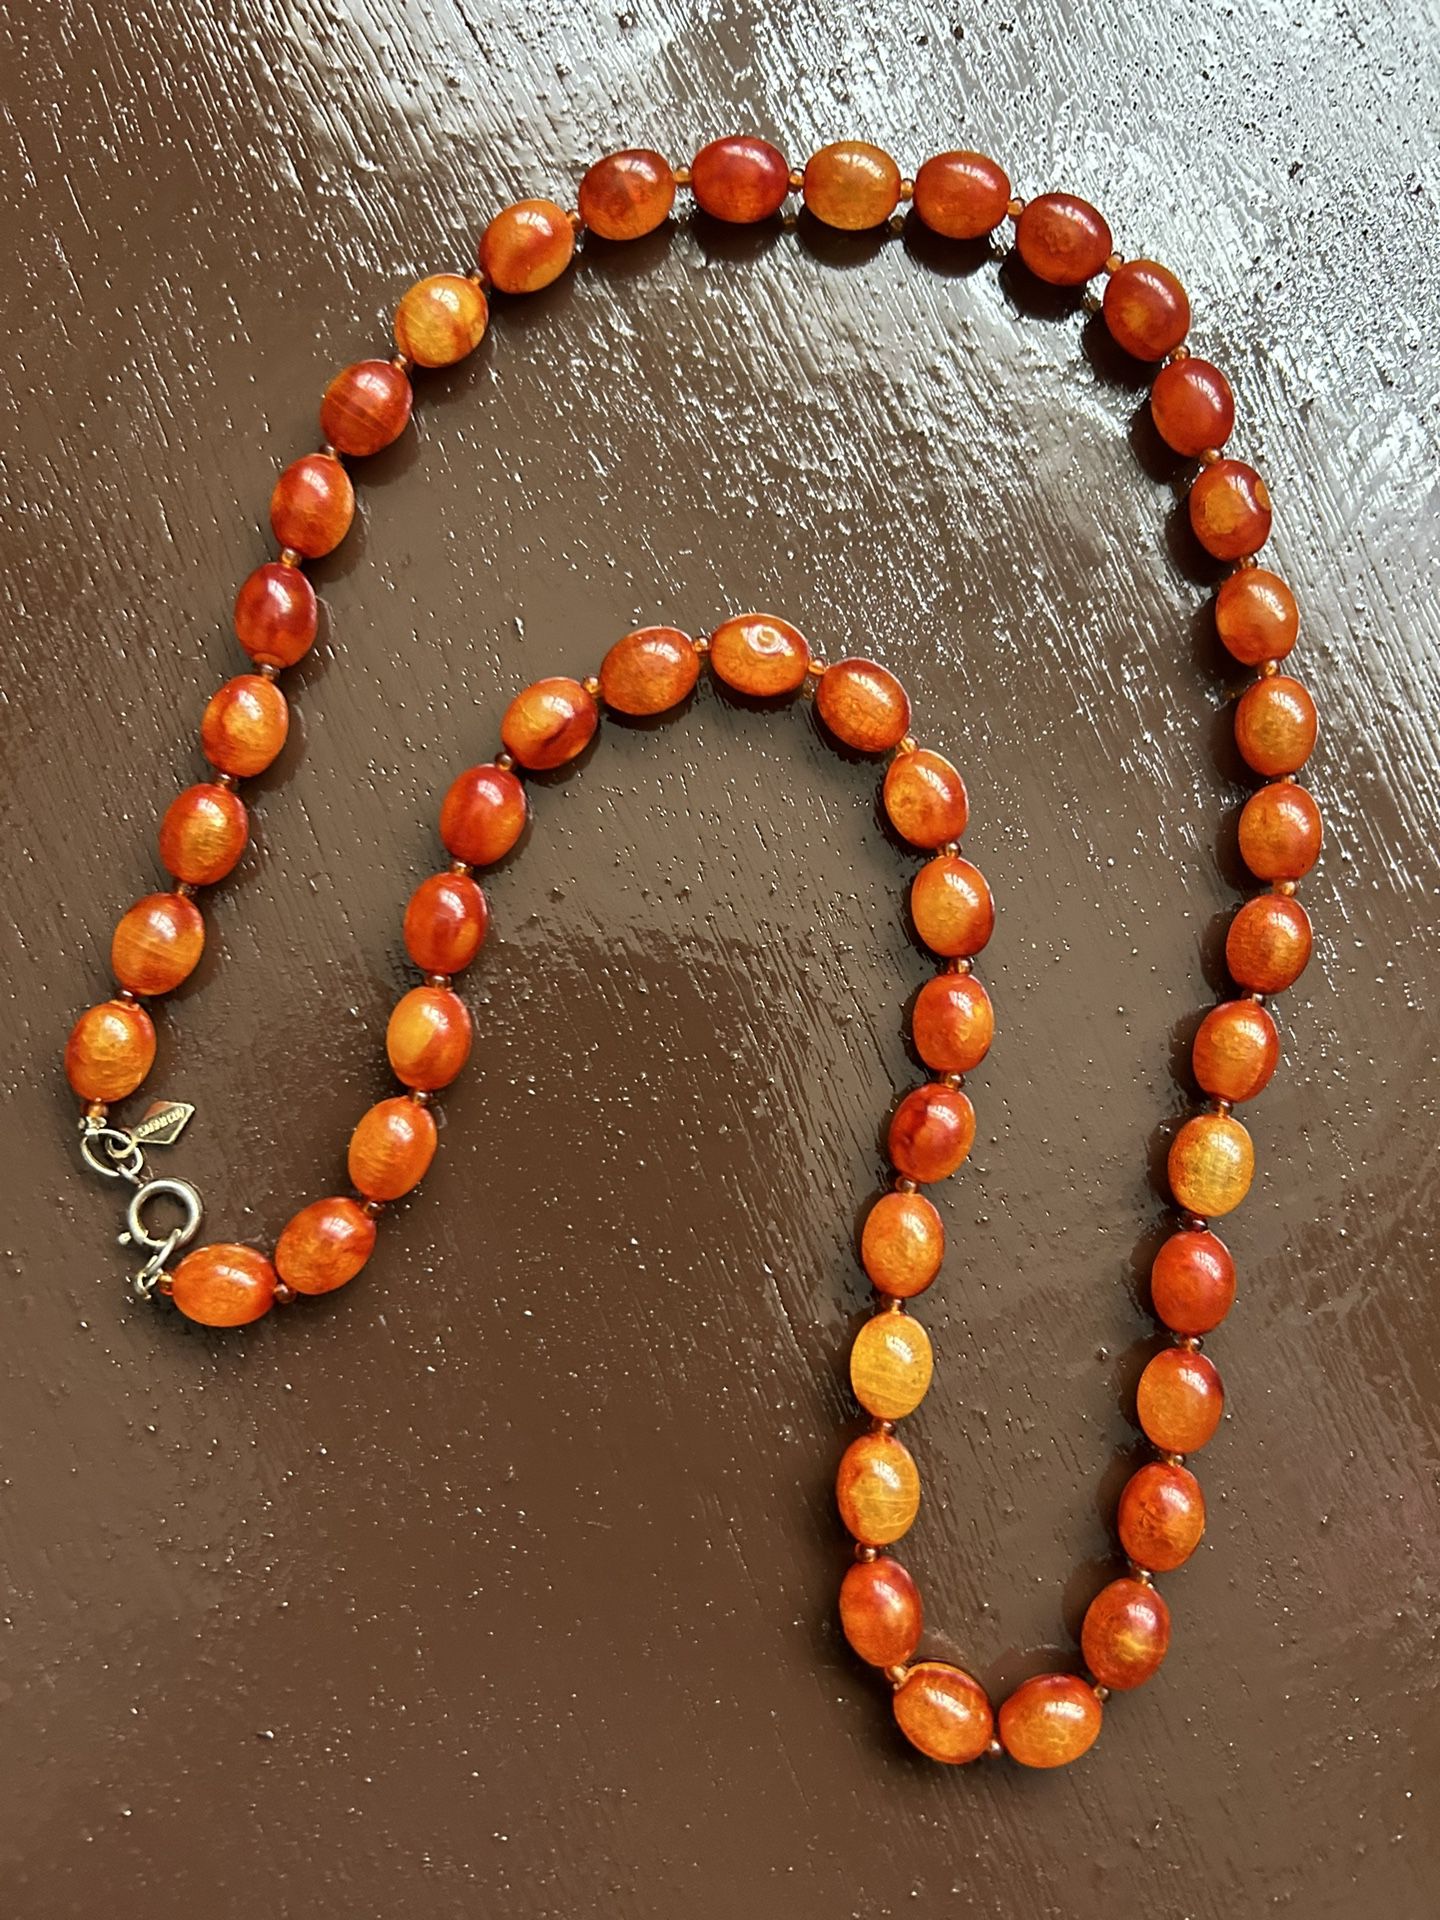 VINTAGE SARAH COV AMBER RESIN BEADS NECKLACE FOR SALE